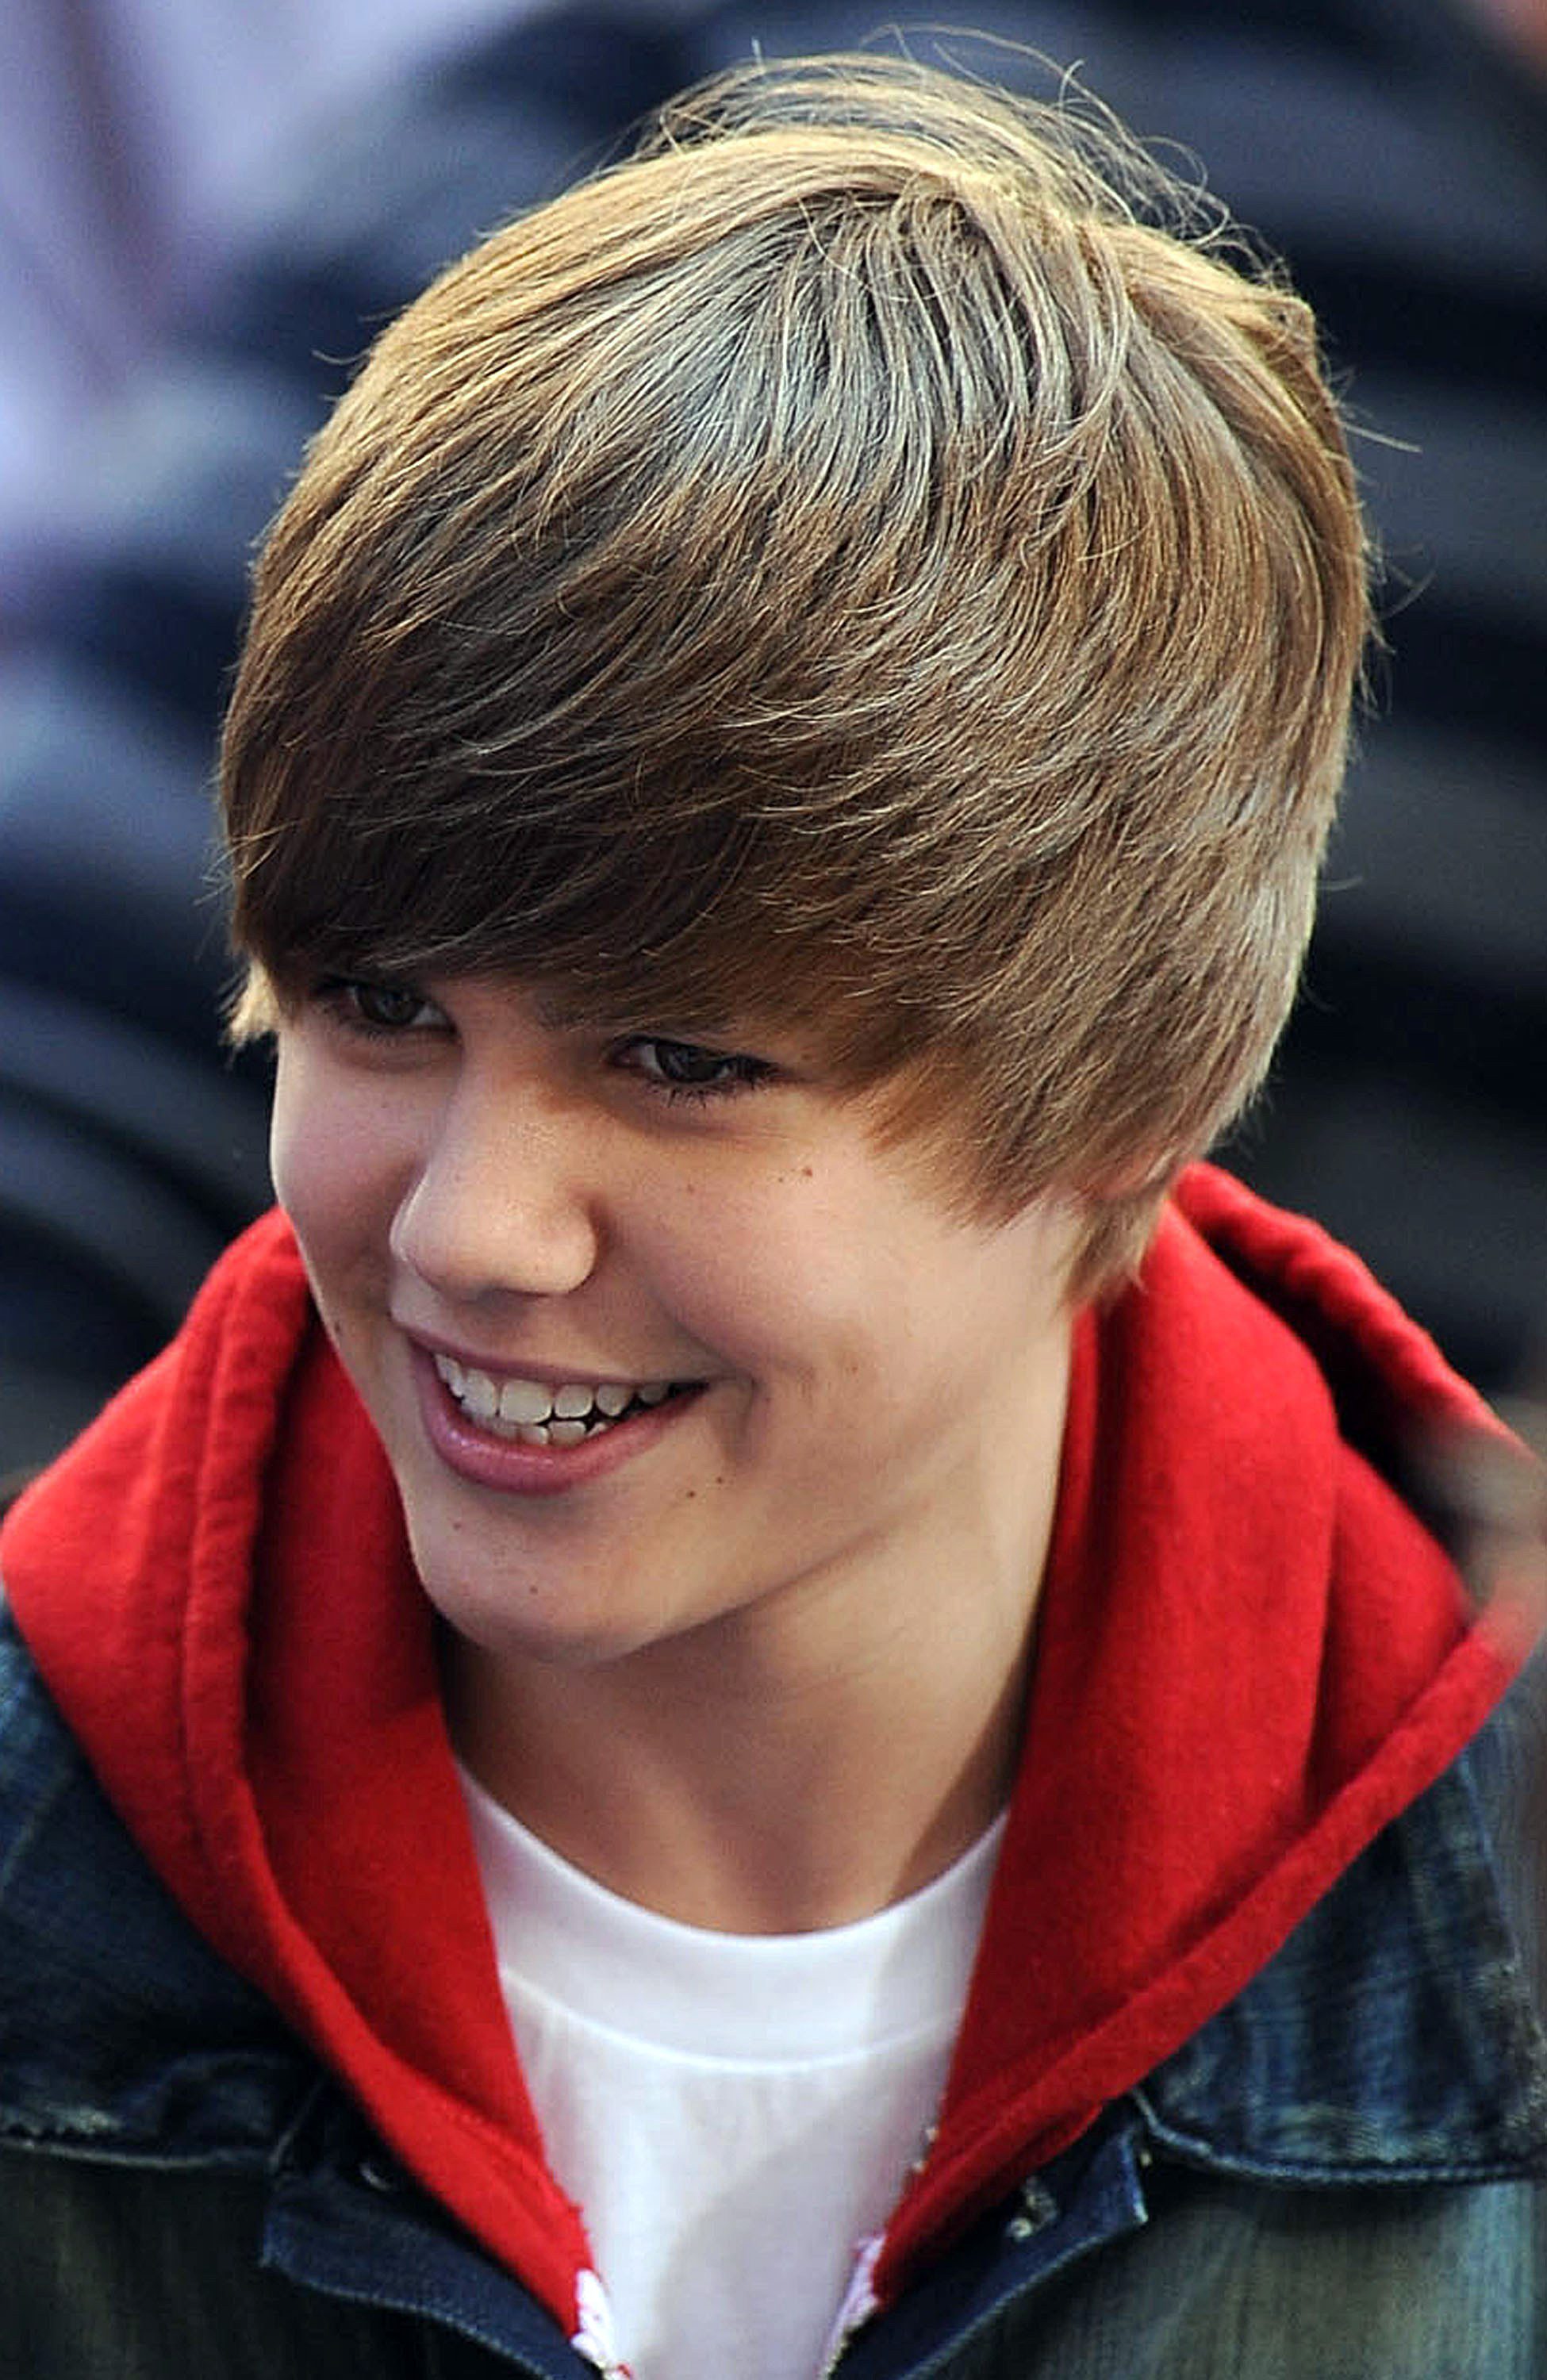 25 Justin Bieber Hairstyles and Haircuts